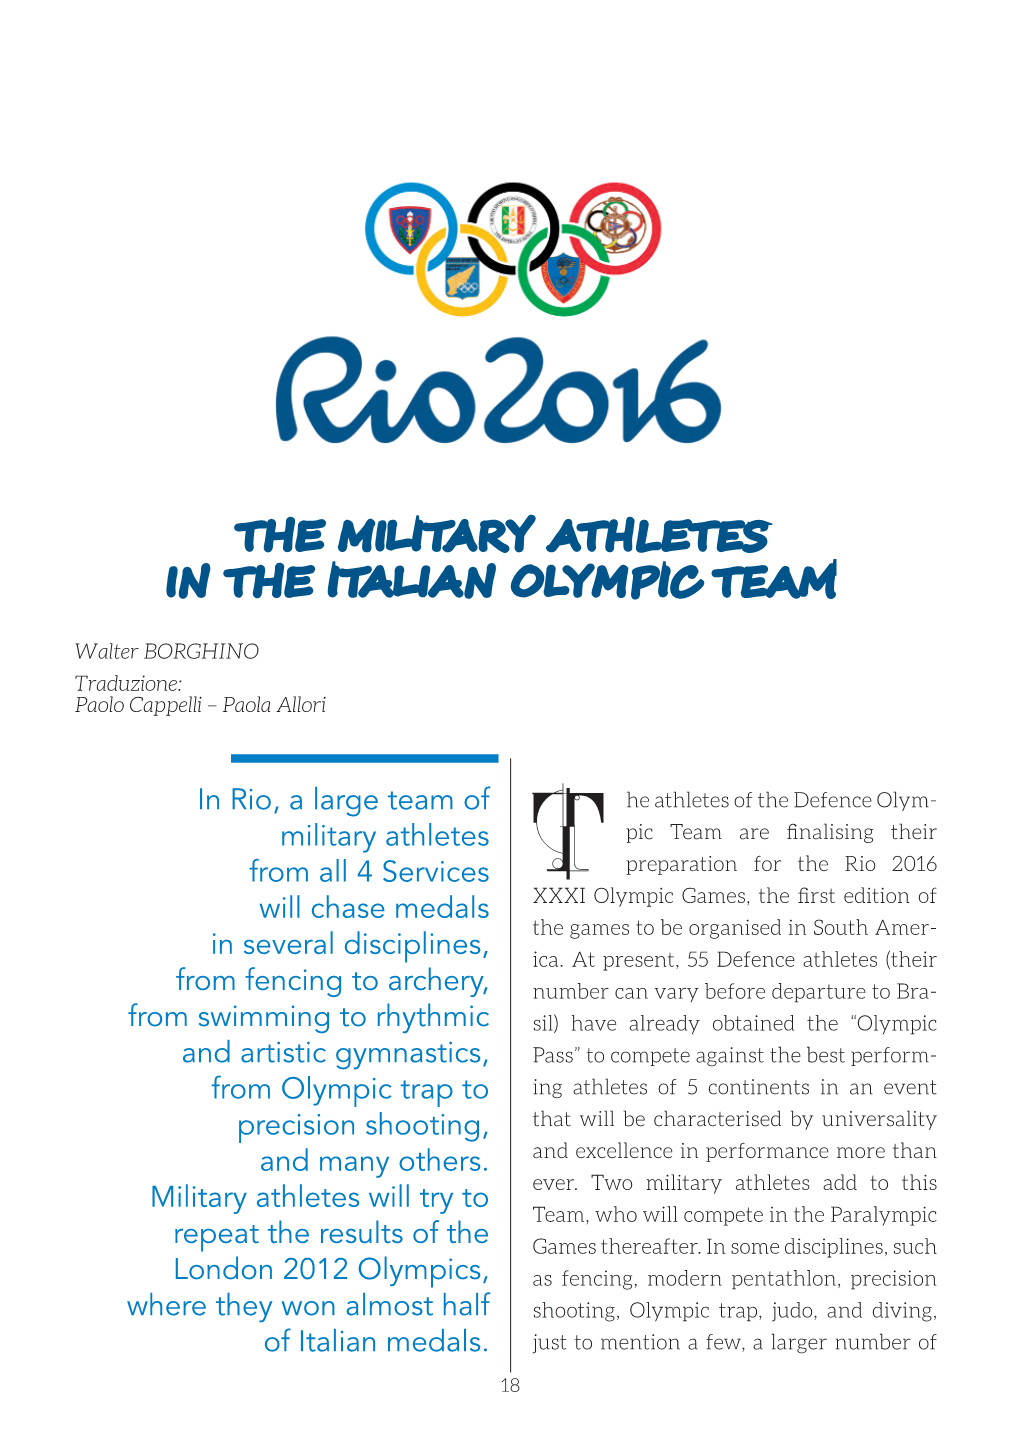 The Military Athletes in the Italian Olympic Team